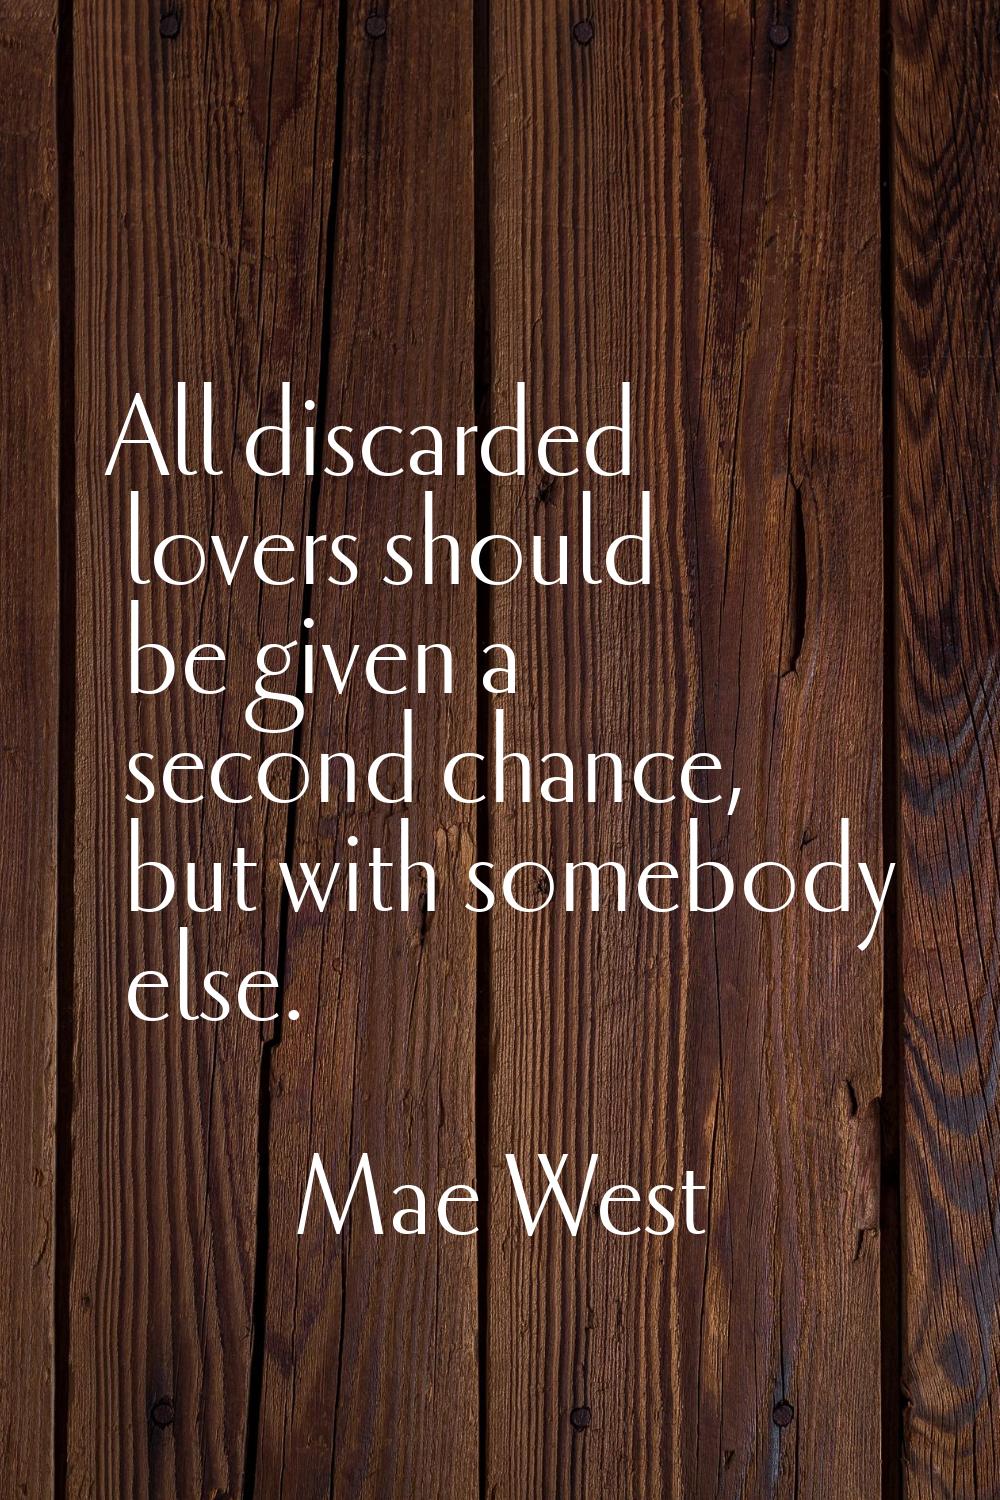 All discarded lovers should be given a second chance, but with somebody else.